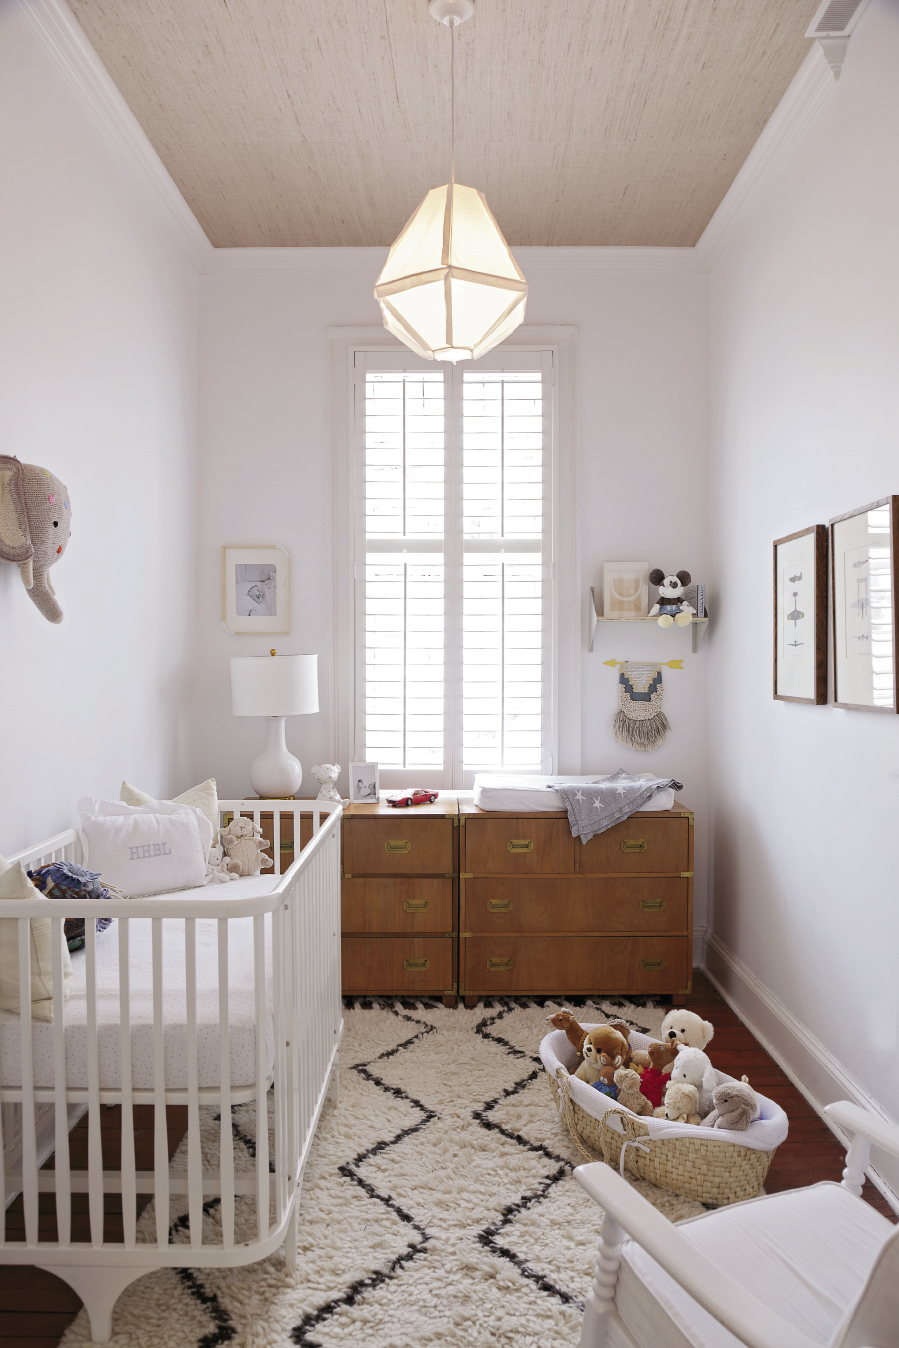 Baby Hugh’s nursery (above, right) features a mid-century dresser, handsome grass-cloth ceiling, and vintage airplane prints.